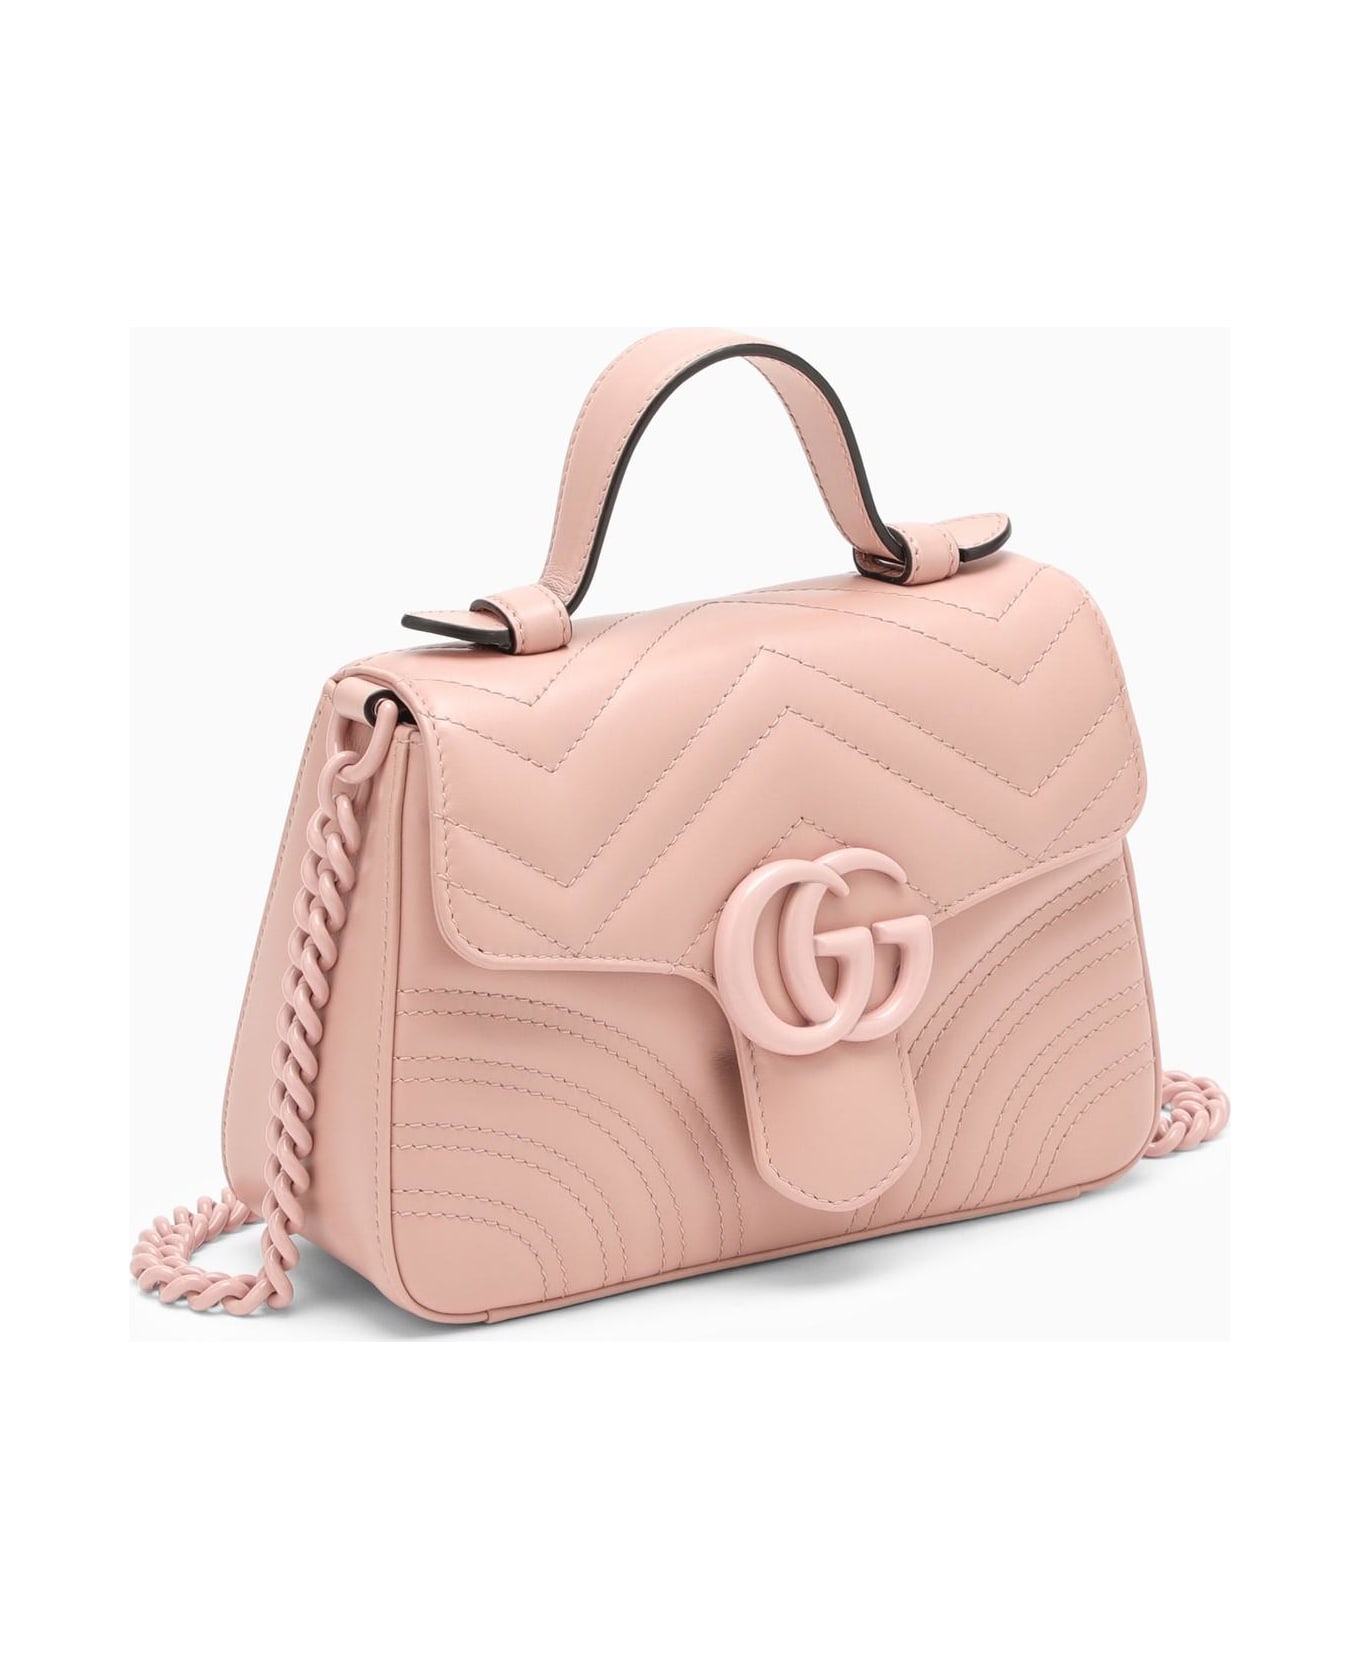 Gucci Gg Marmont Pink Leather Mini Handbag - Perfect Pink トートバッグ